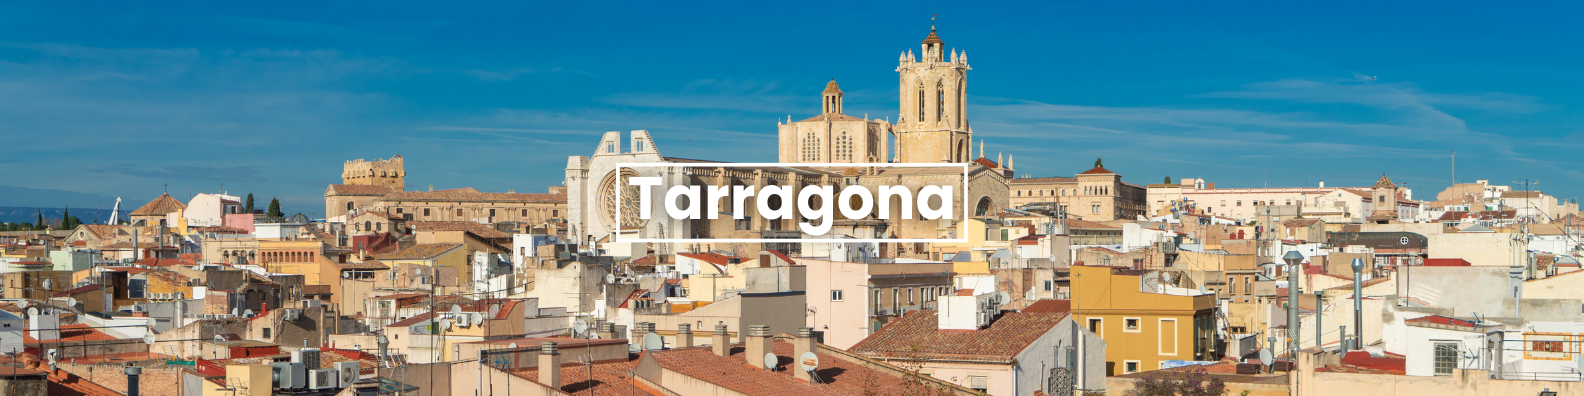 a blurry picture of a city with the word tarragona on it . Barter's Travelnet 